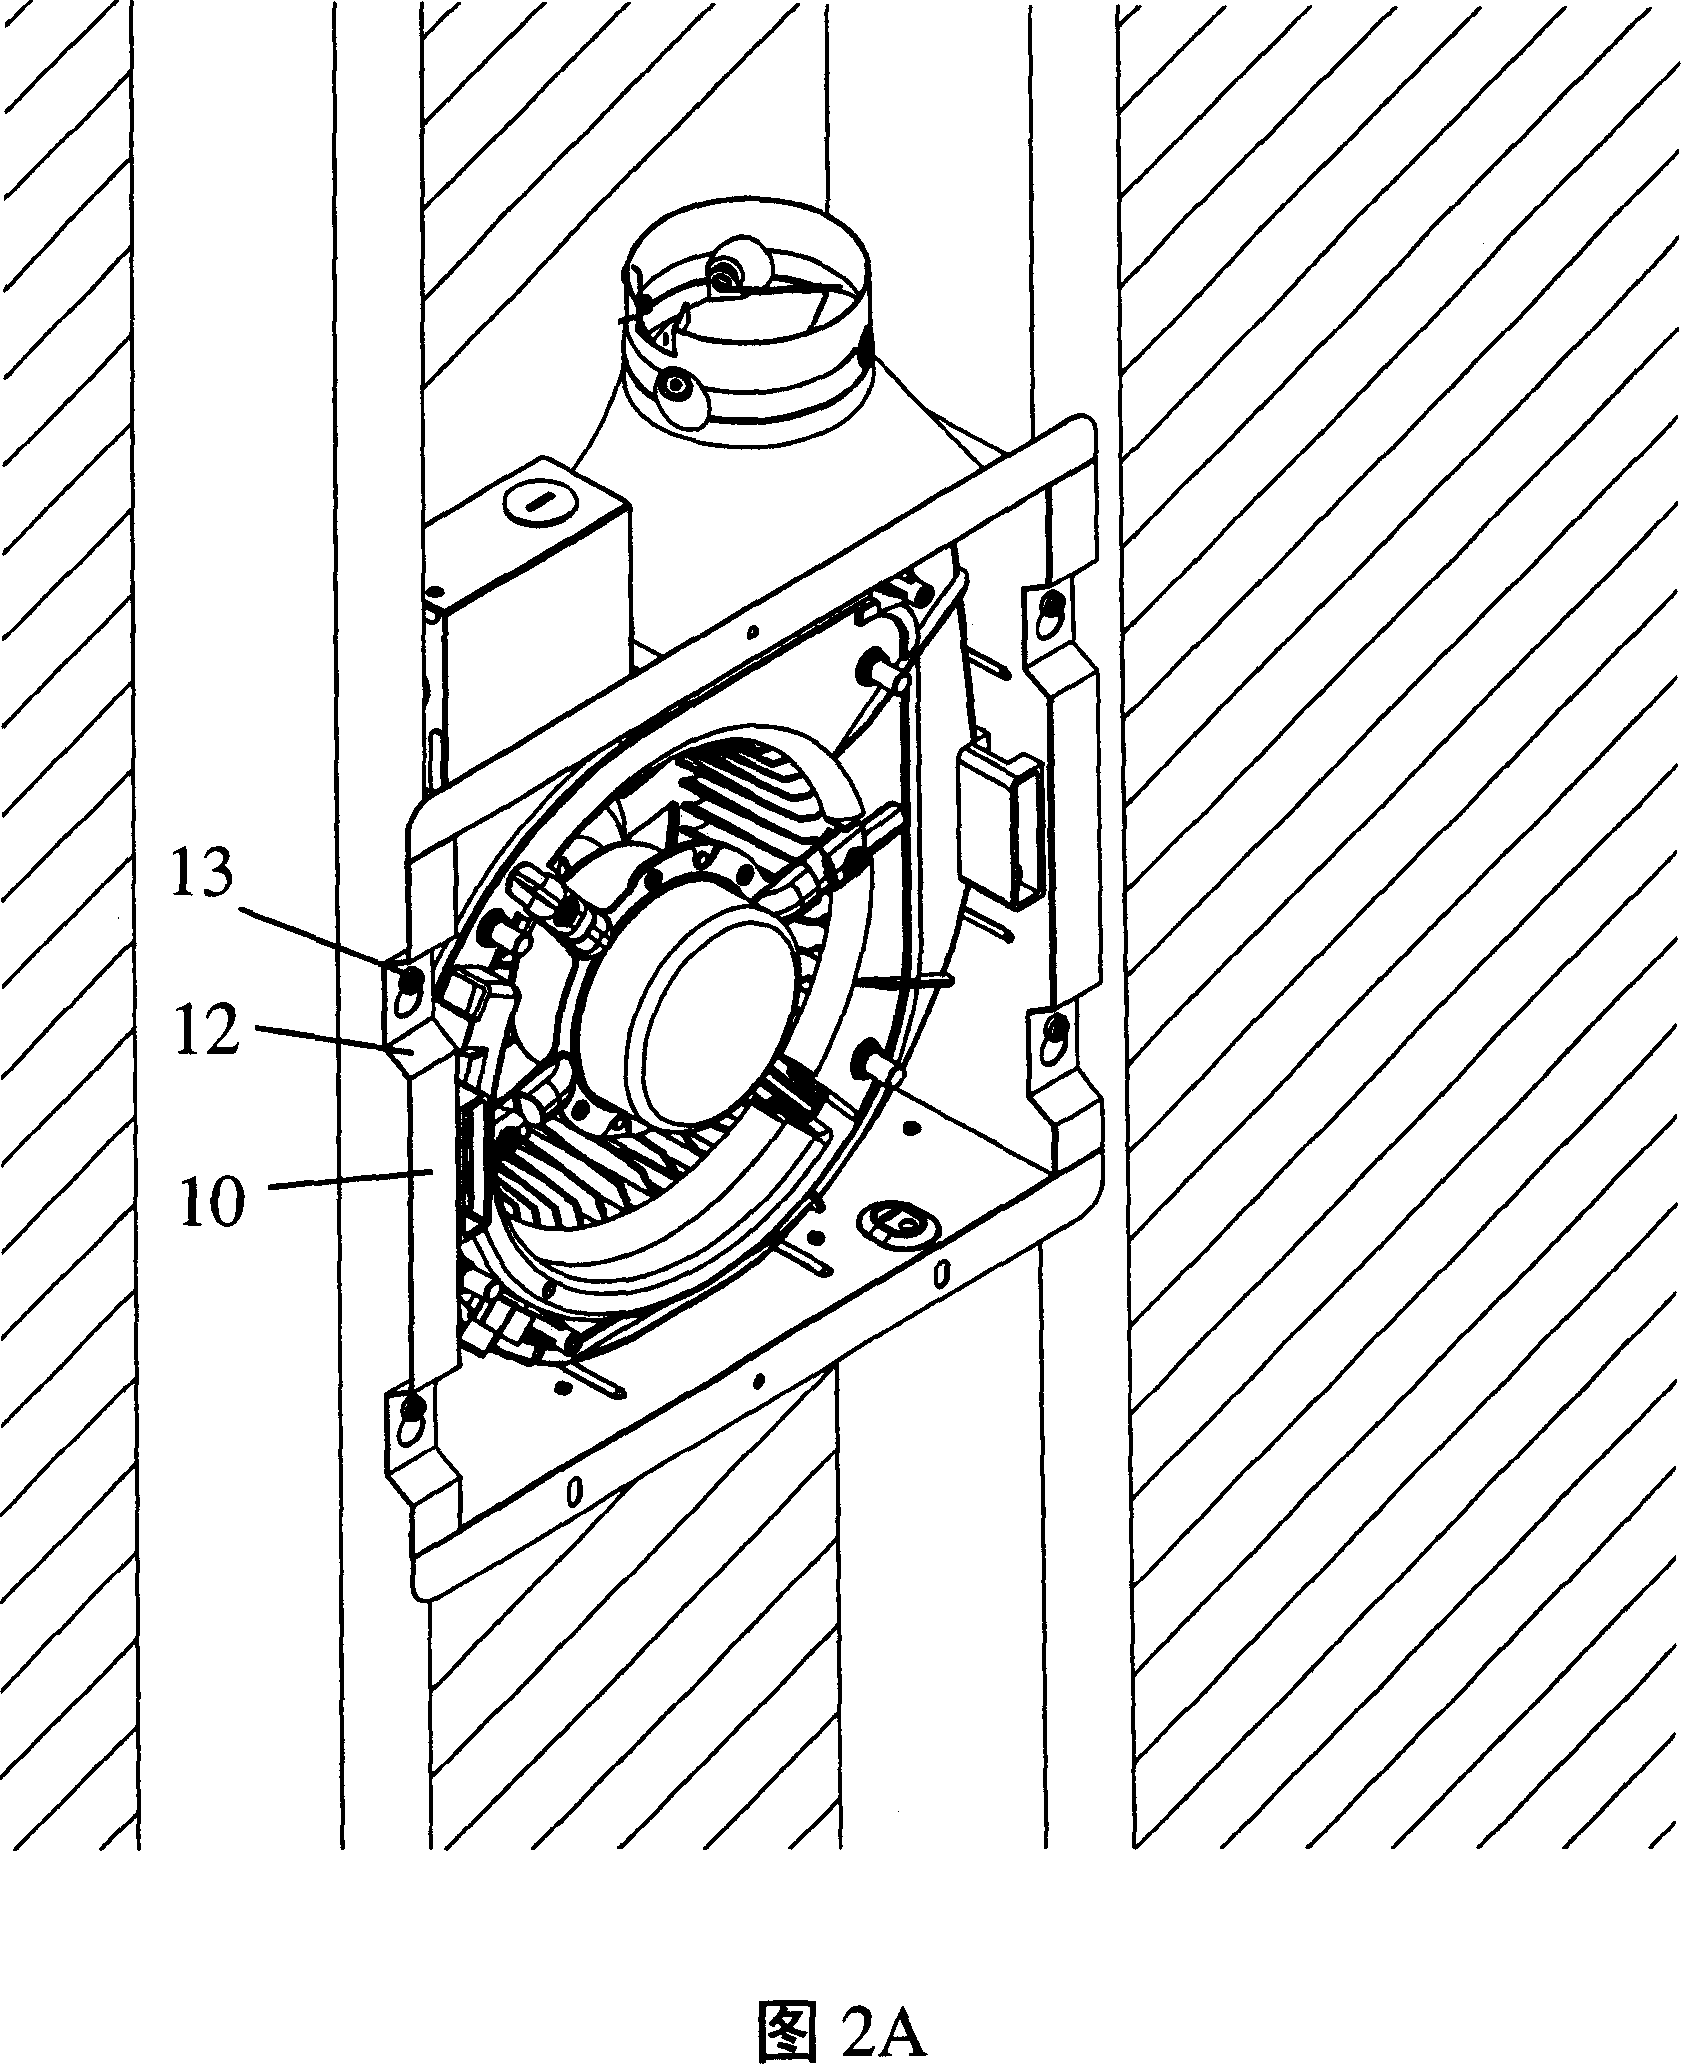 Fixed structure for installing ventilation fan